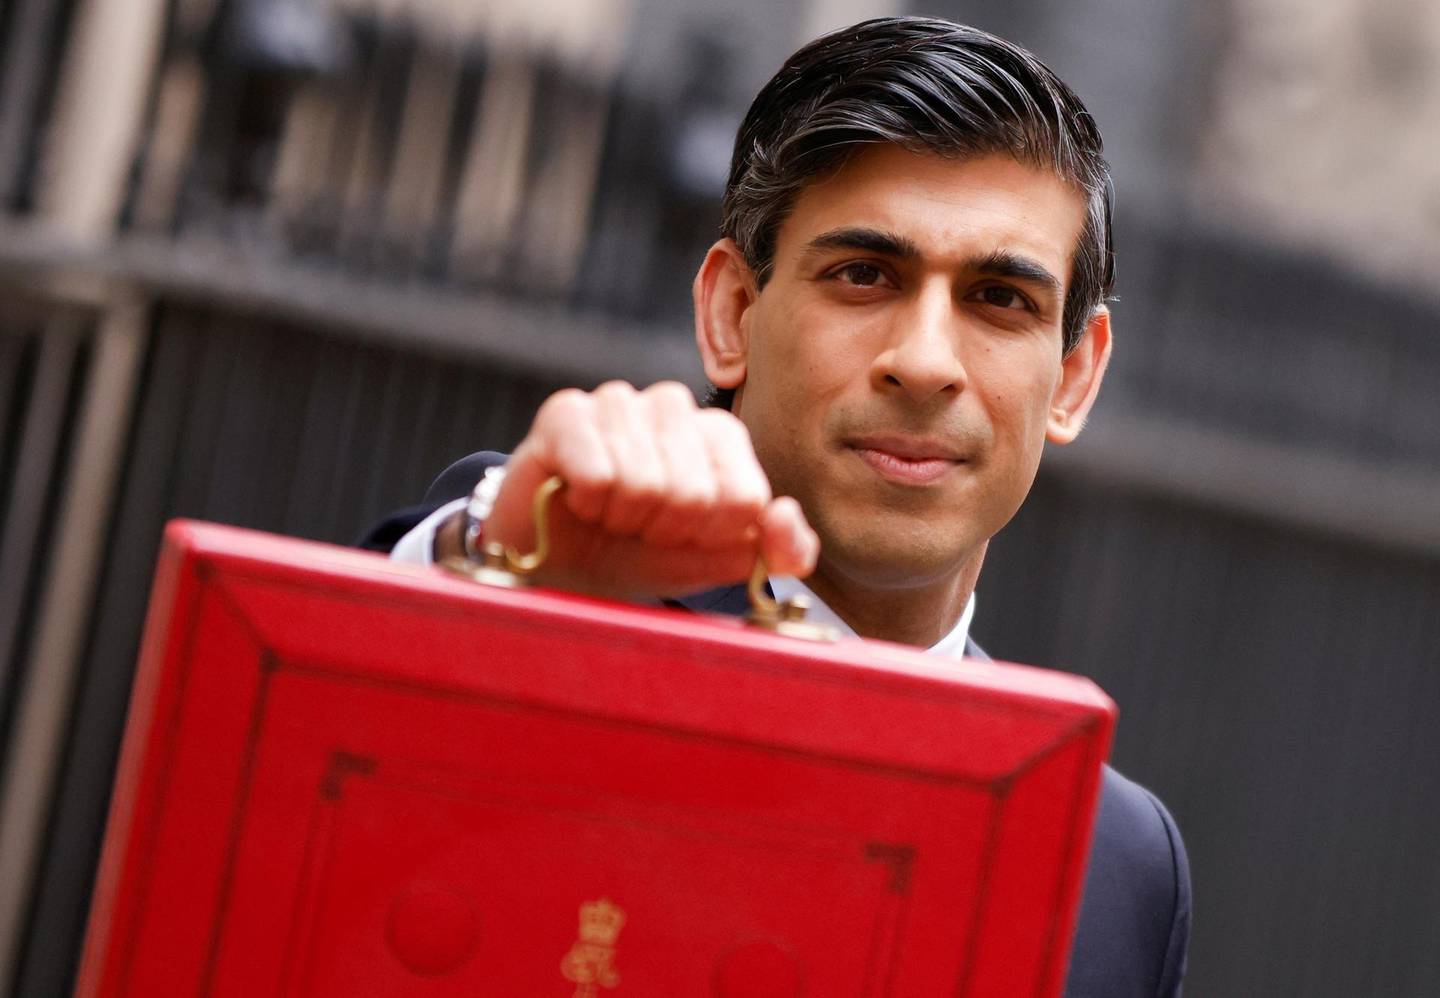 Britain's Chancellor of the Exchequer Rishi Sunak holds the budget box outside Downing Street in London, Britain, March 3, 2021. REUTERS/John Sibley     TPX IMAGES OF THE DAY